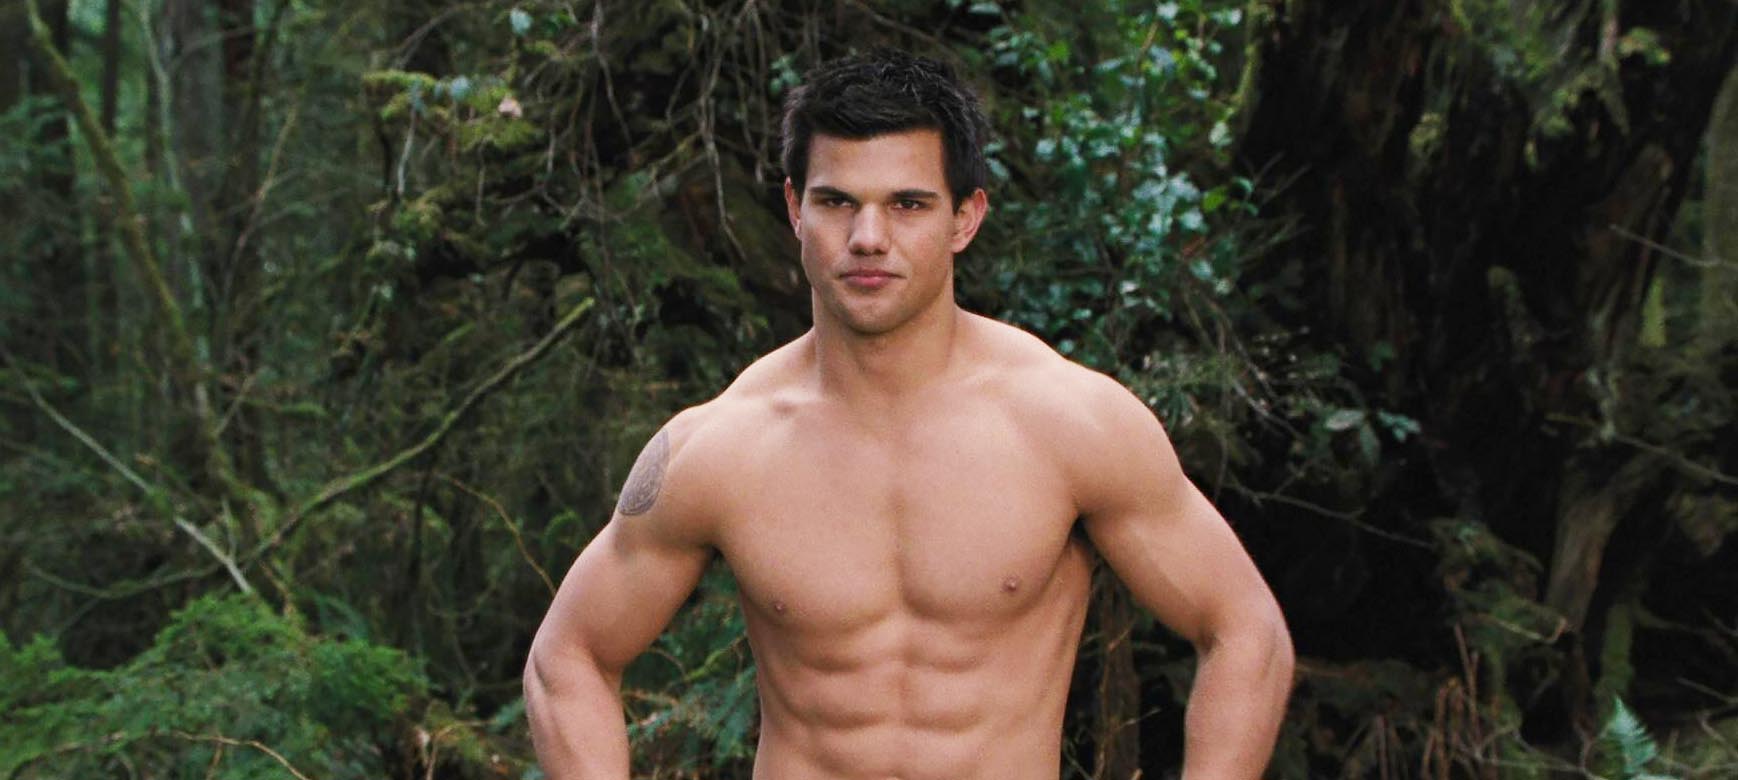 Taylor Lautner reveals the truth about how much weight he gained for ‘Twilight’